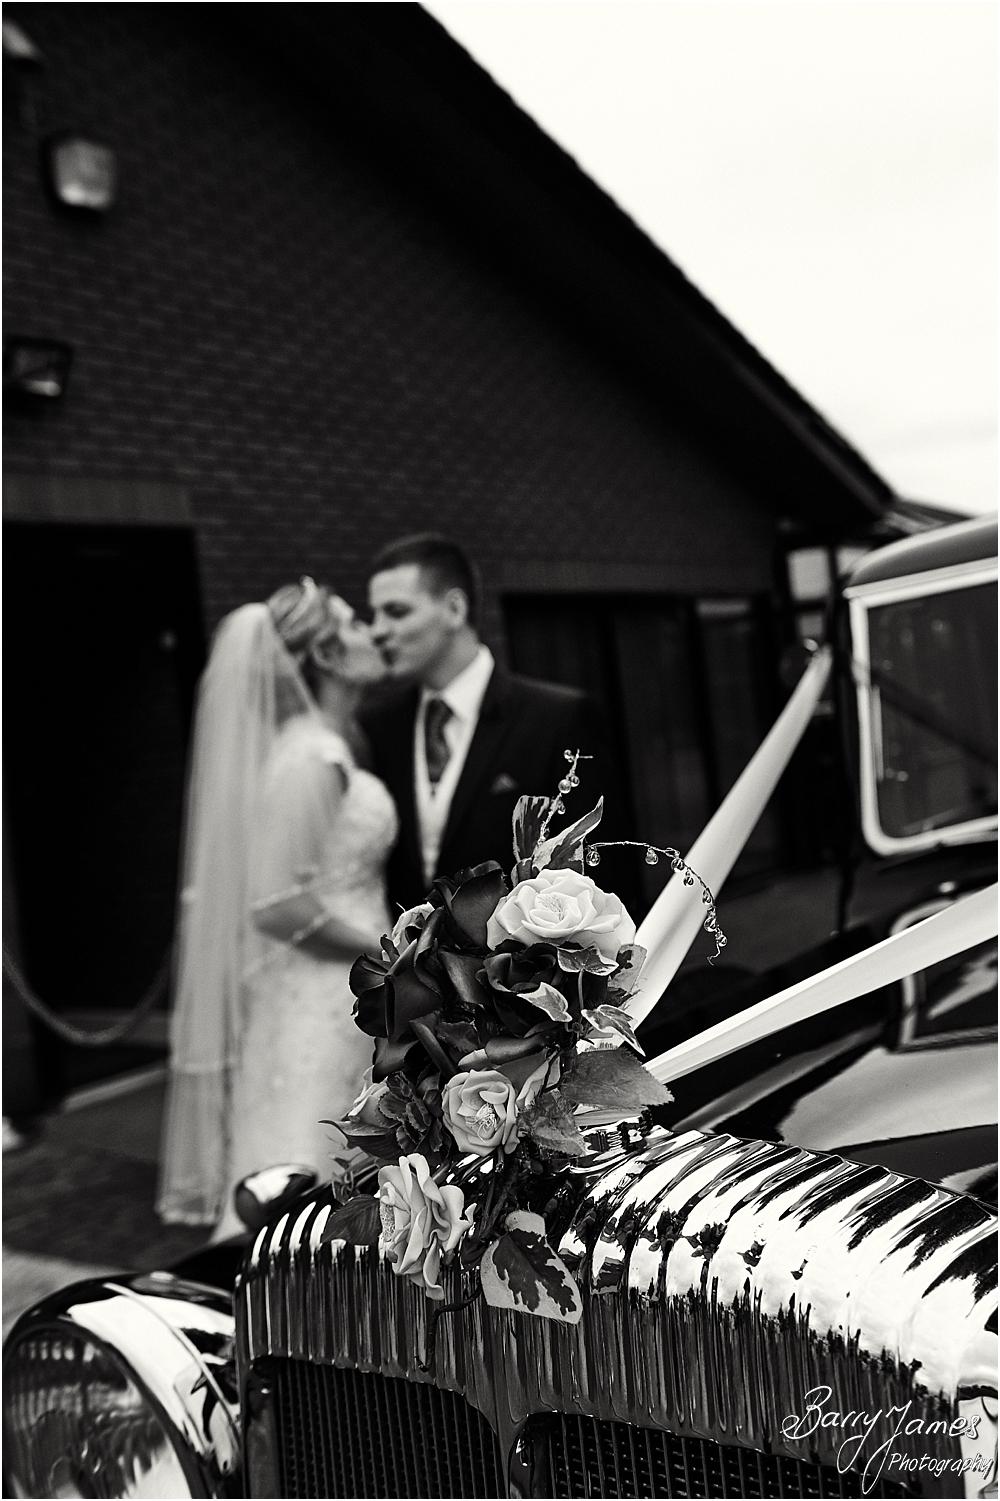 Arriving in style at Calderfields Walsall with Special Day Services captured by Walsall Wedding Photographer Barry James